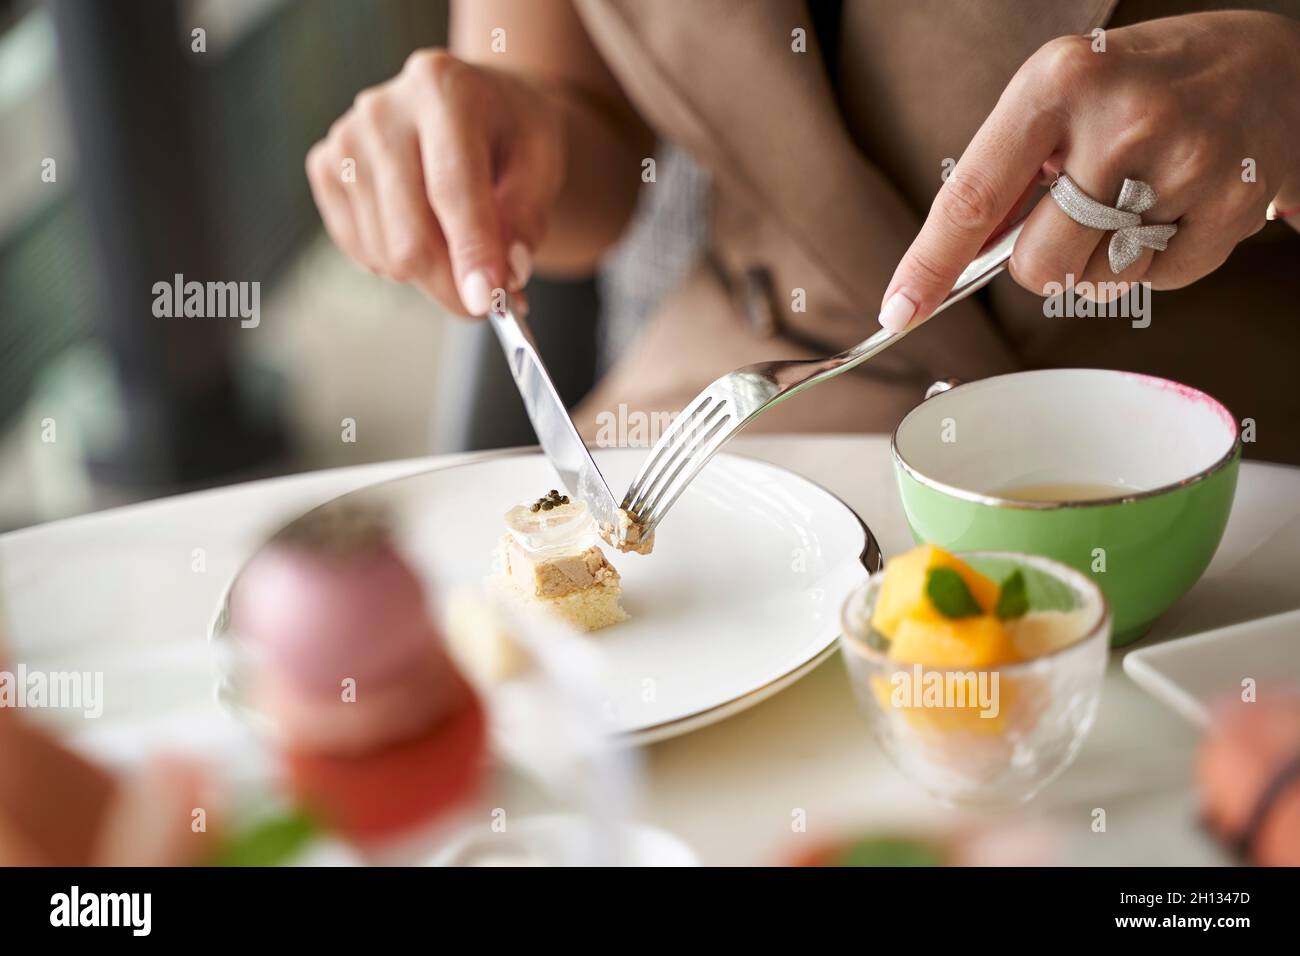 close-up shot of hands of a female asian customer eating desserts at a fining dining restaurant Stock Photo